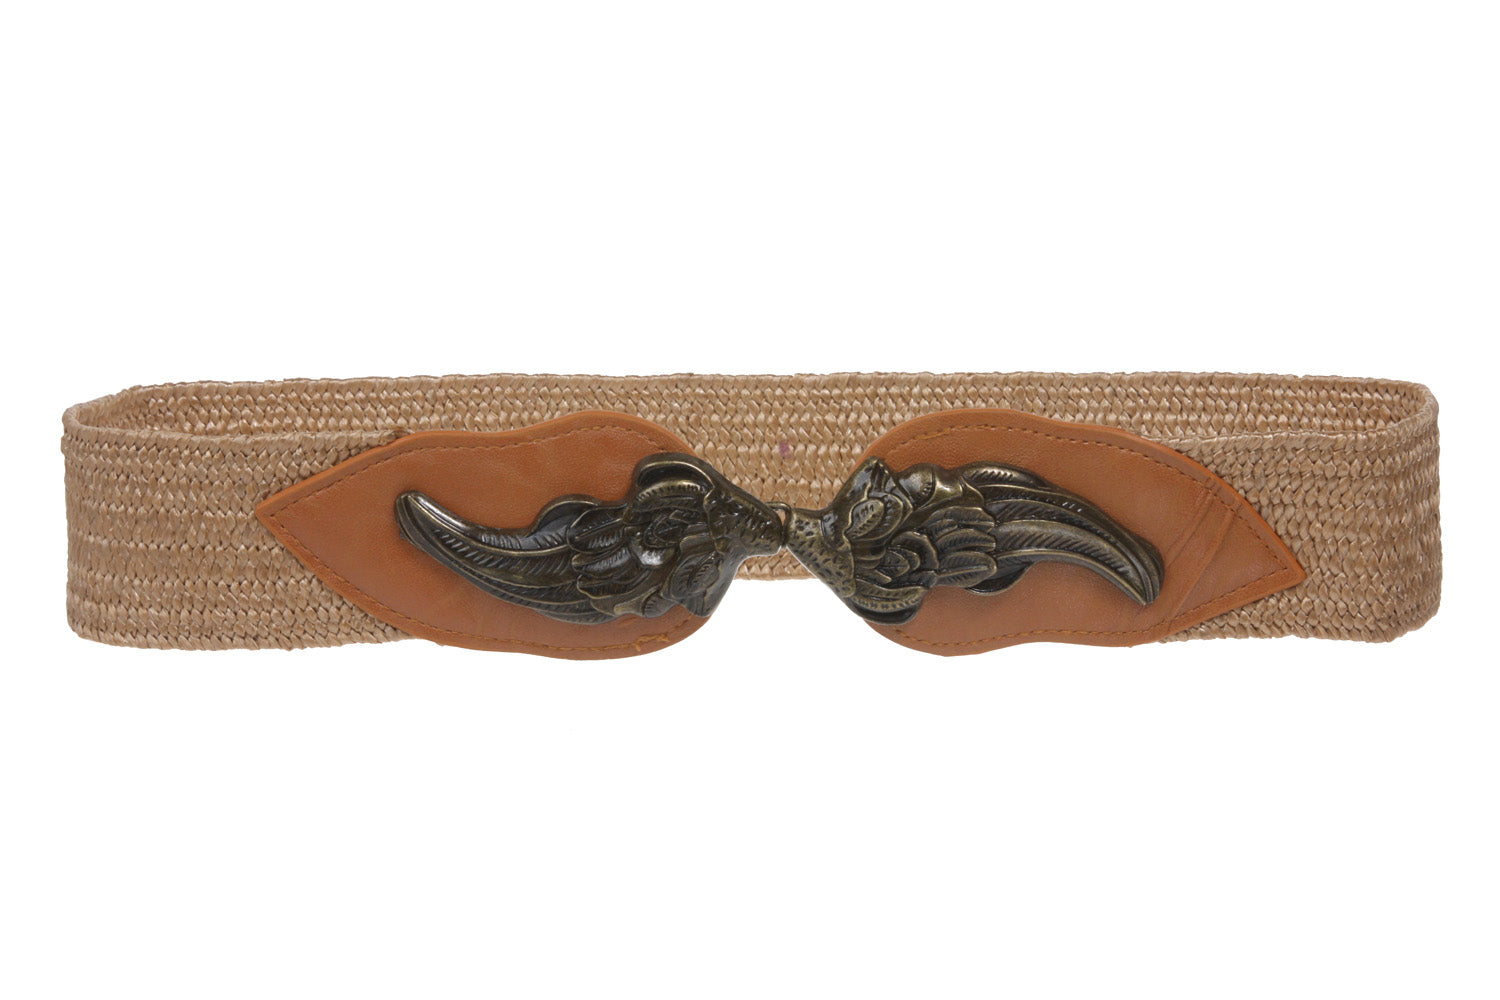 2" Wide High Waist Fashion Stretch Belt With Feather Shaped Buckle Size: One-